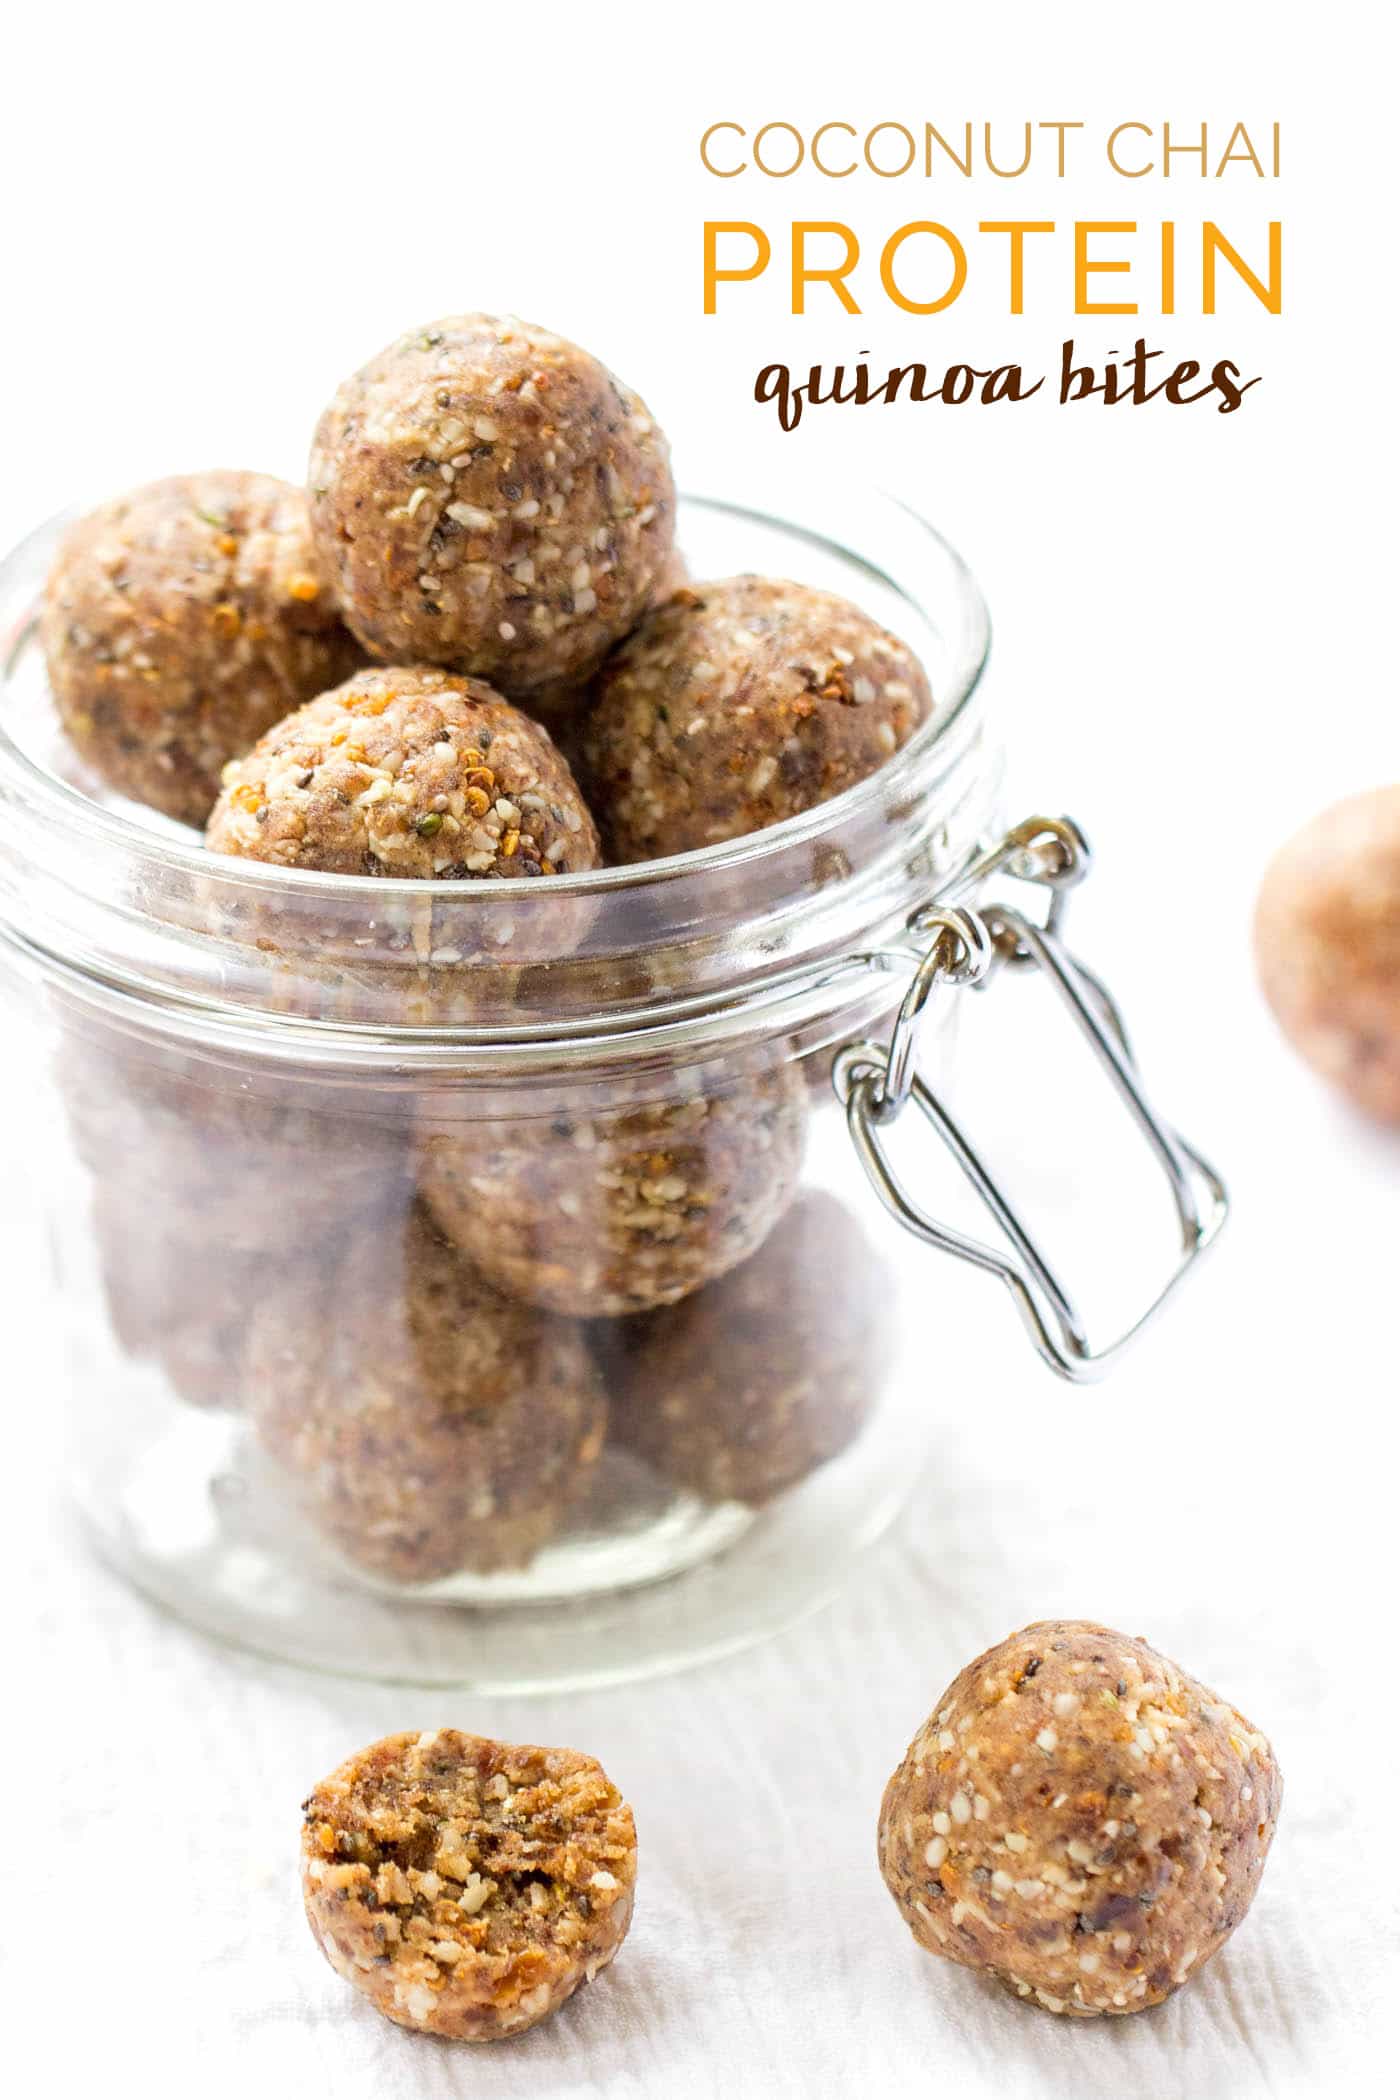 Need an pre- or post-workout snack? Grab one of these HIGH PROTEIN coconut chai quinoa energy bites - they're a great way to give your body the fuel it needs!